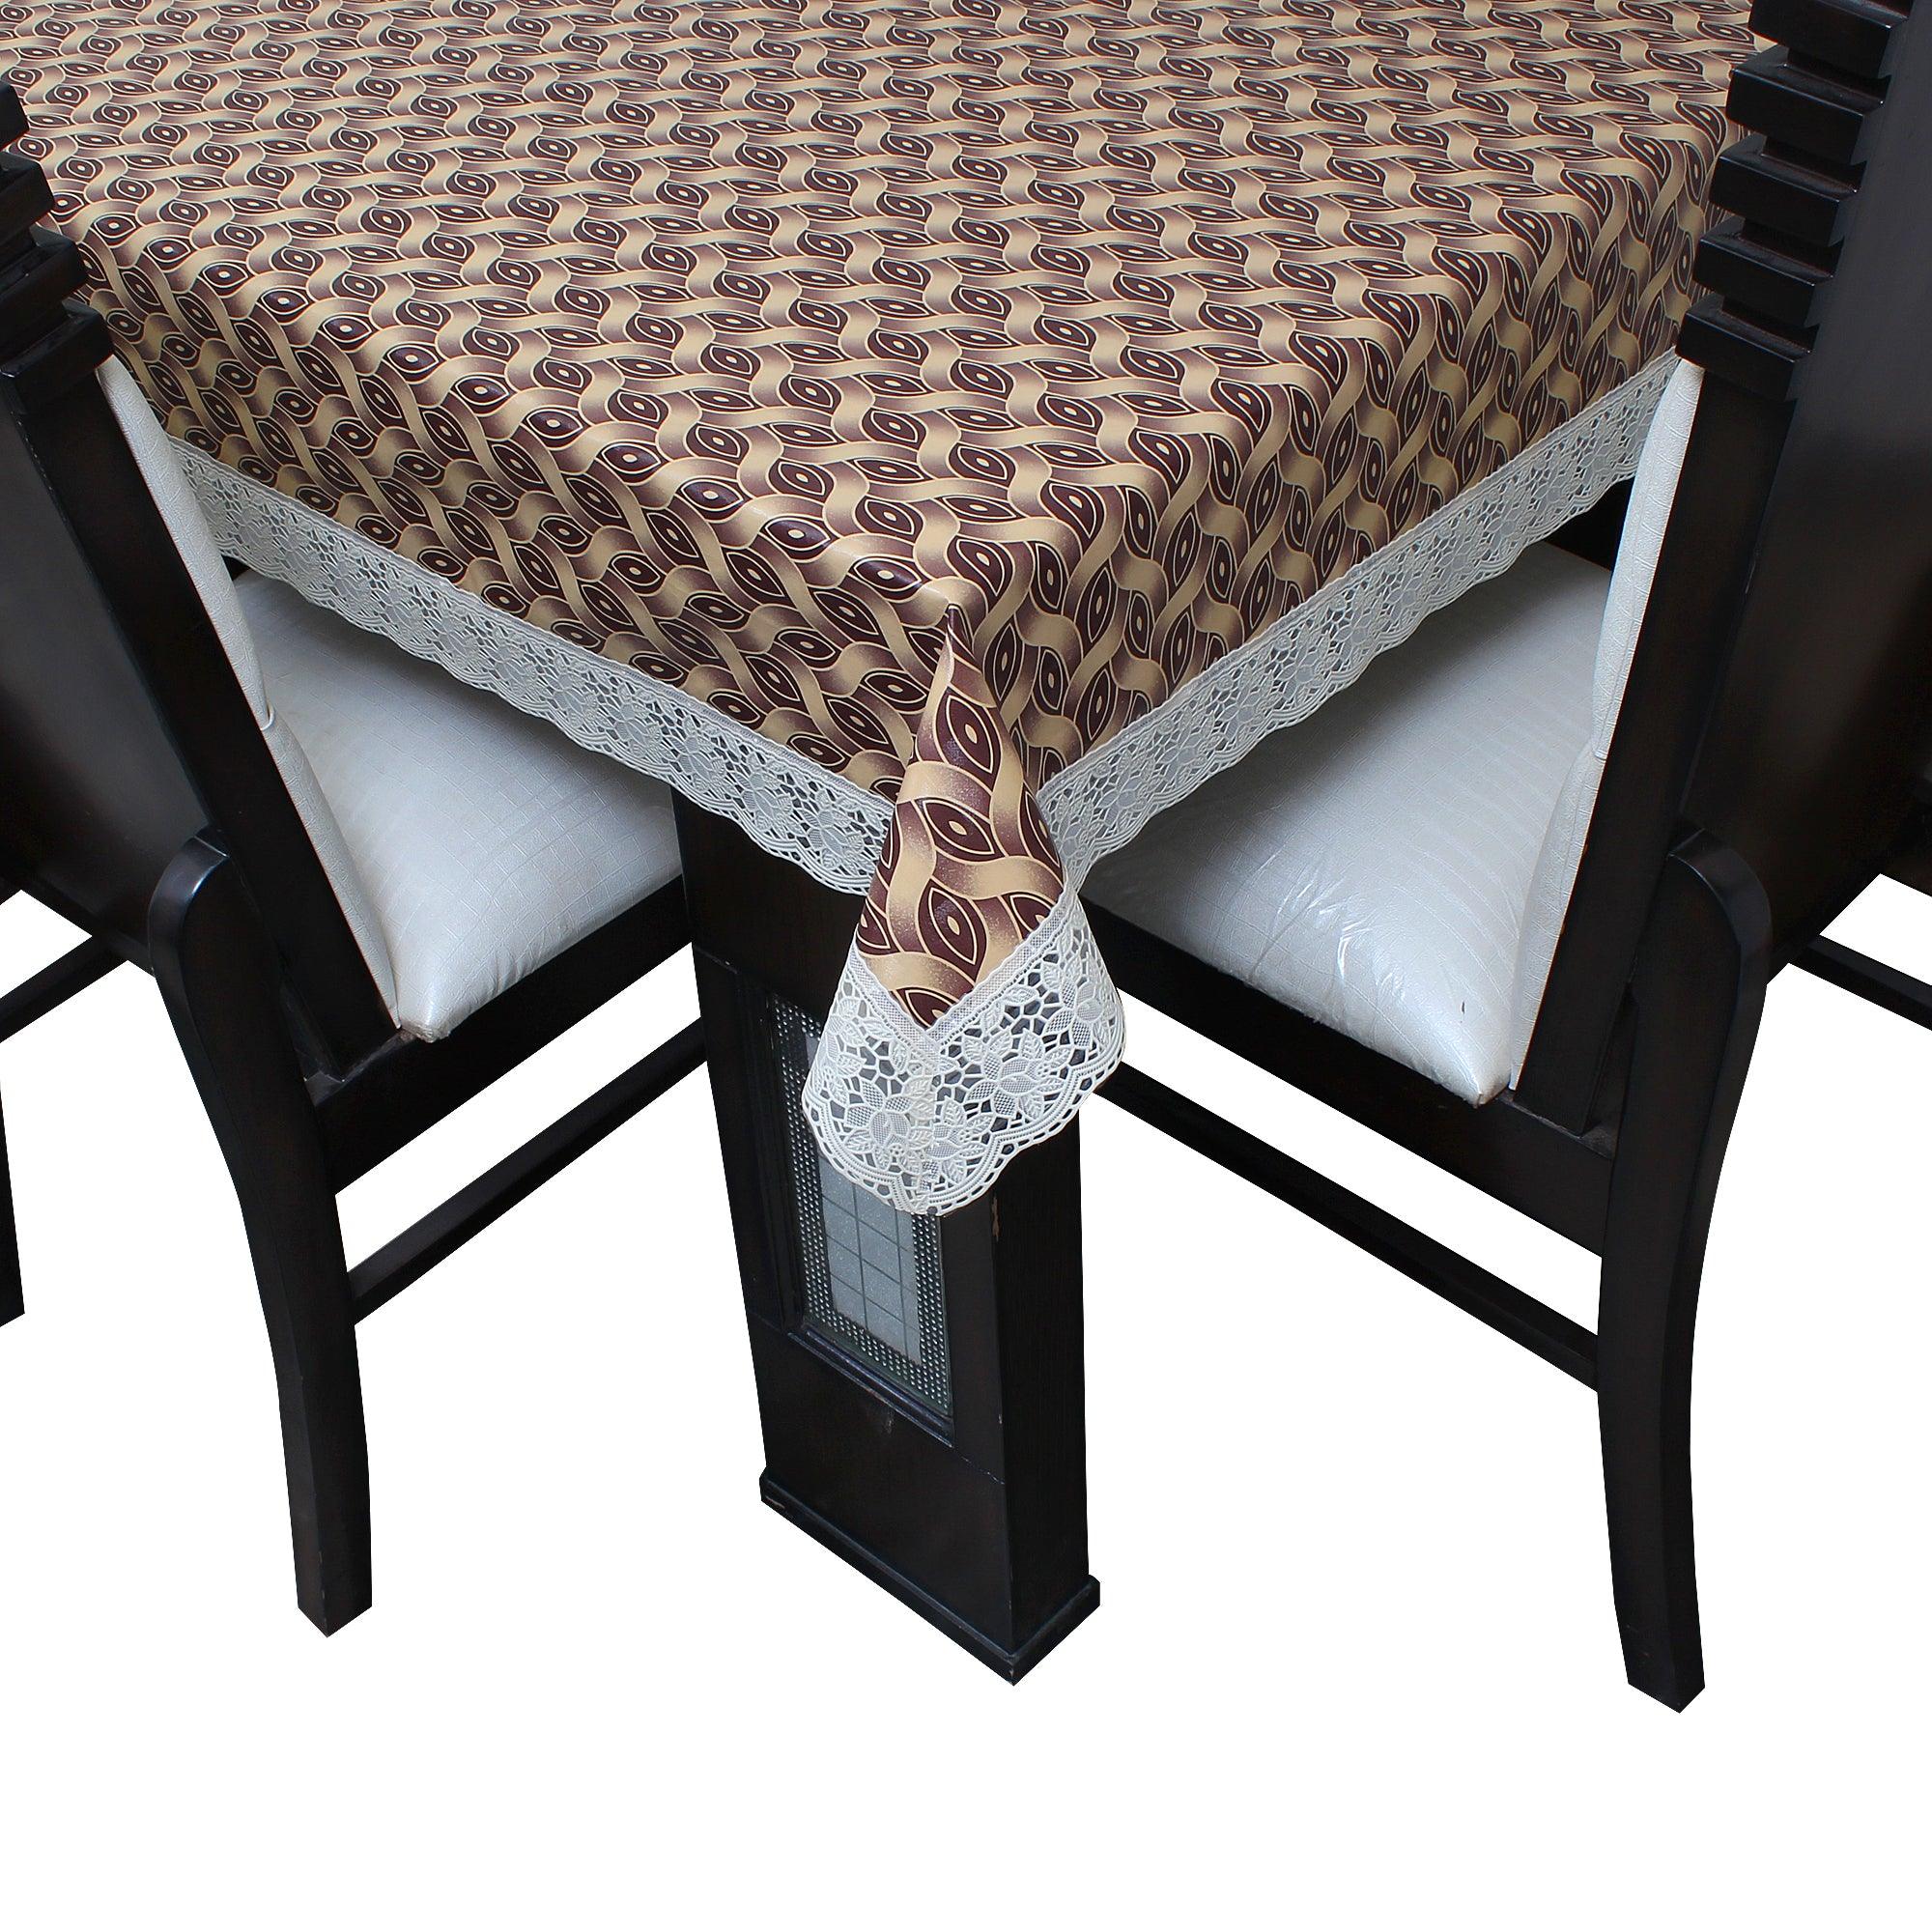 Waterproof and Dustproof Dining Table Cover, SA73 - Dream Care Furnishings Private Limited